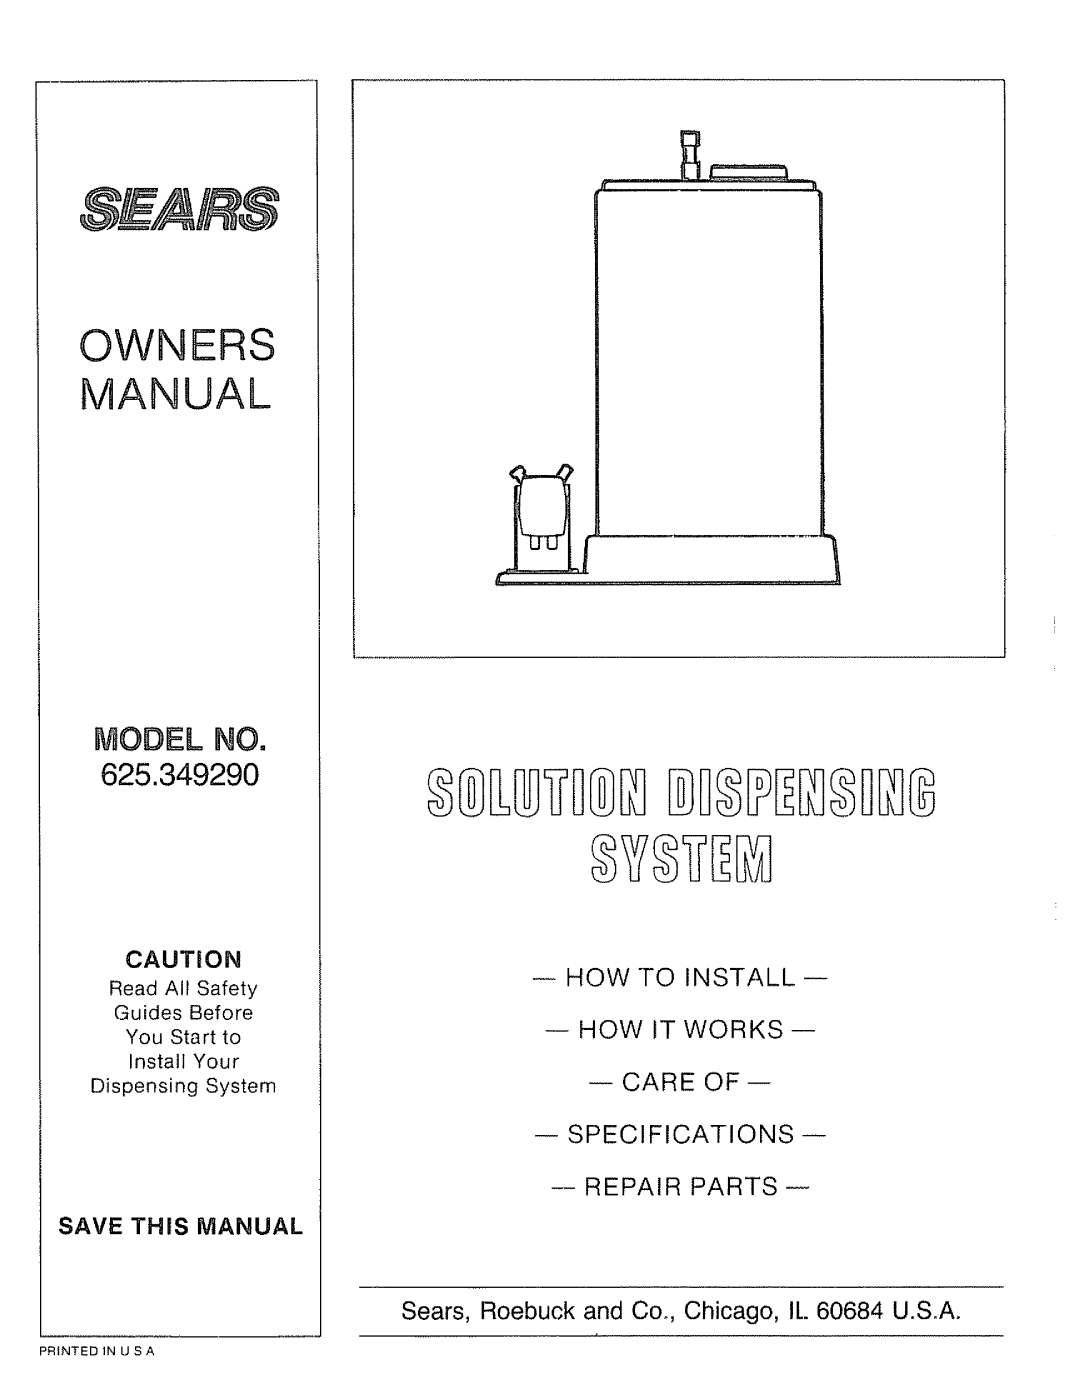 Sears 625.34929 owner manual Model No, How To Install How It Works Care Of, Specifications Repair Parts, Save This Manual 